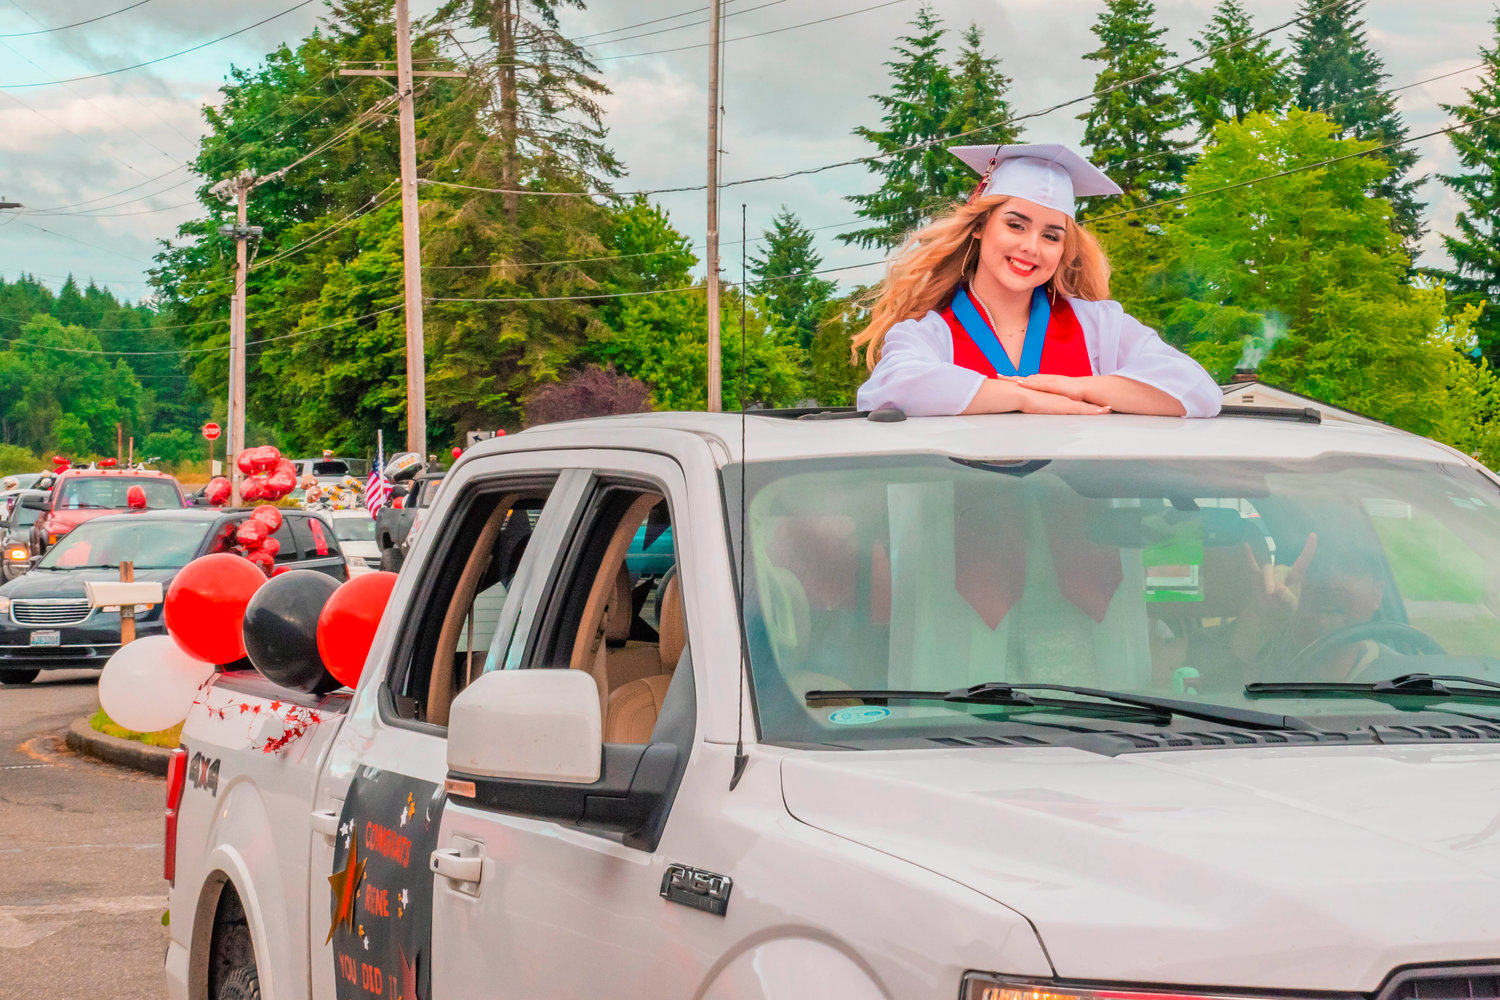 Renee Diello smiles while sporting her cap and gown and riding in the sunroof of a truck during a parade for Tenino graduates on Friday.